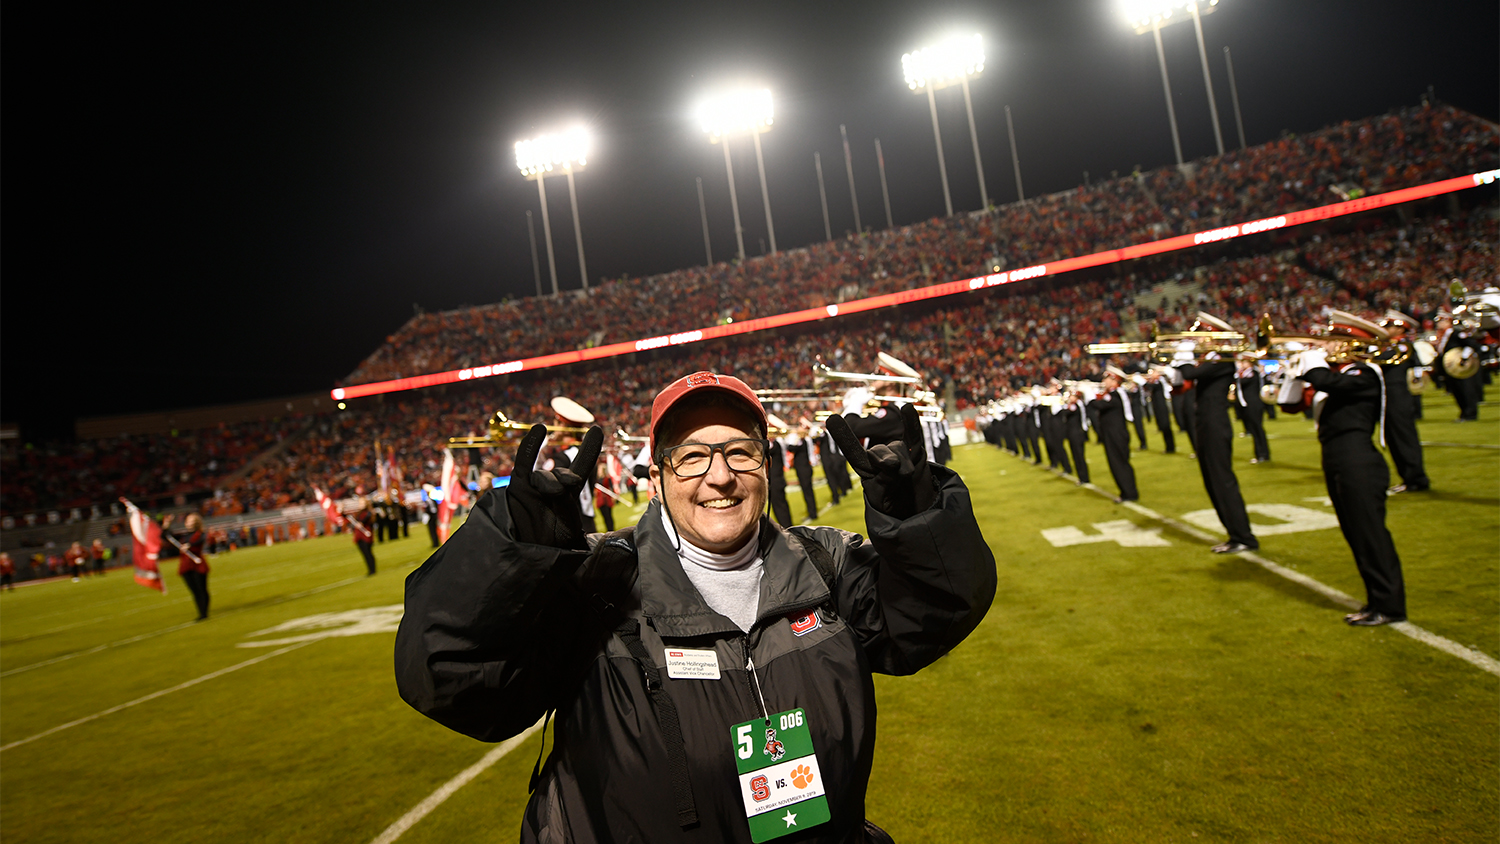 Justine Hollingshead on the field at an NC State football game